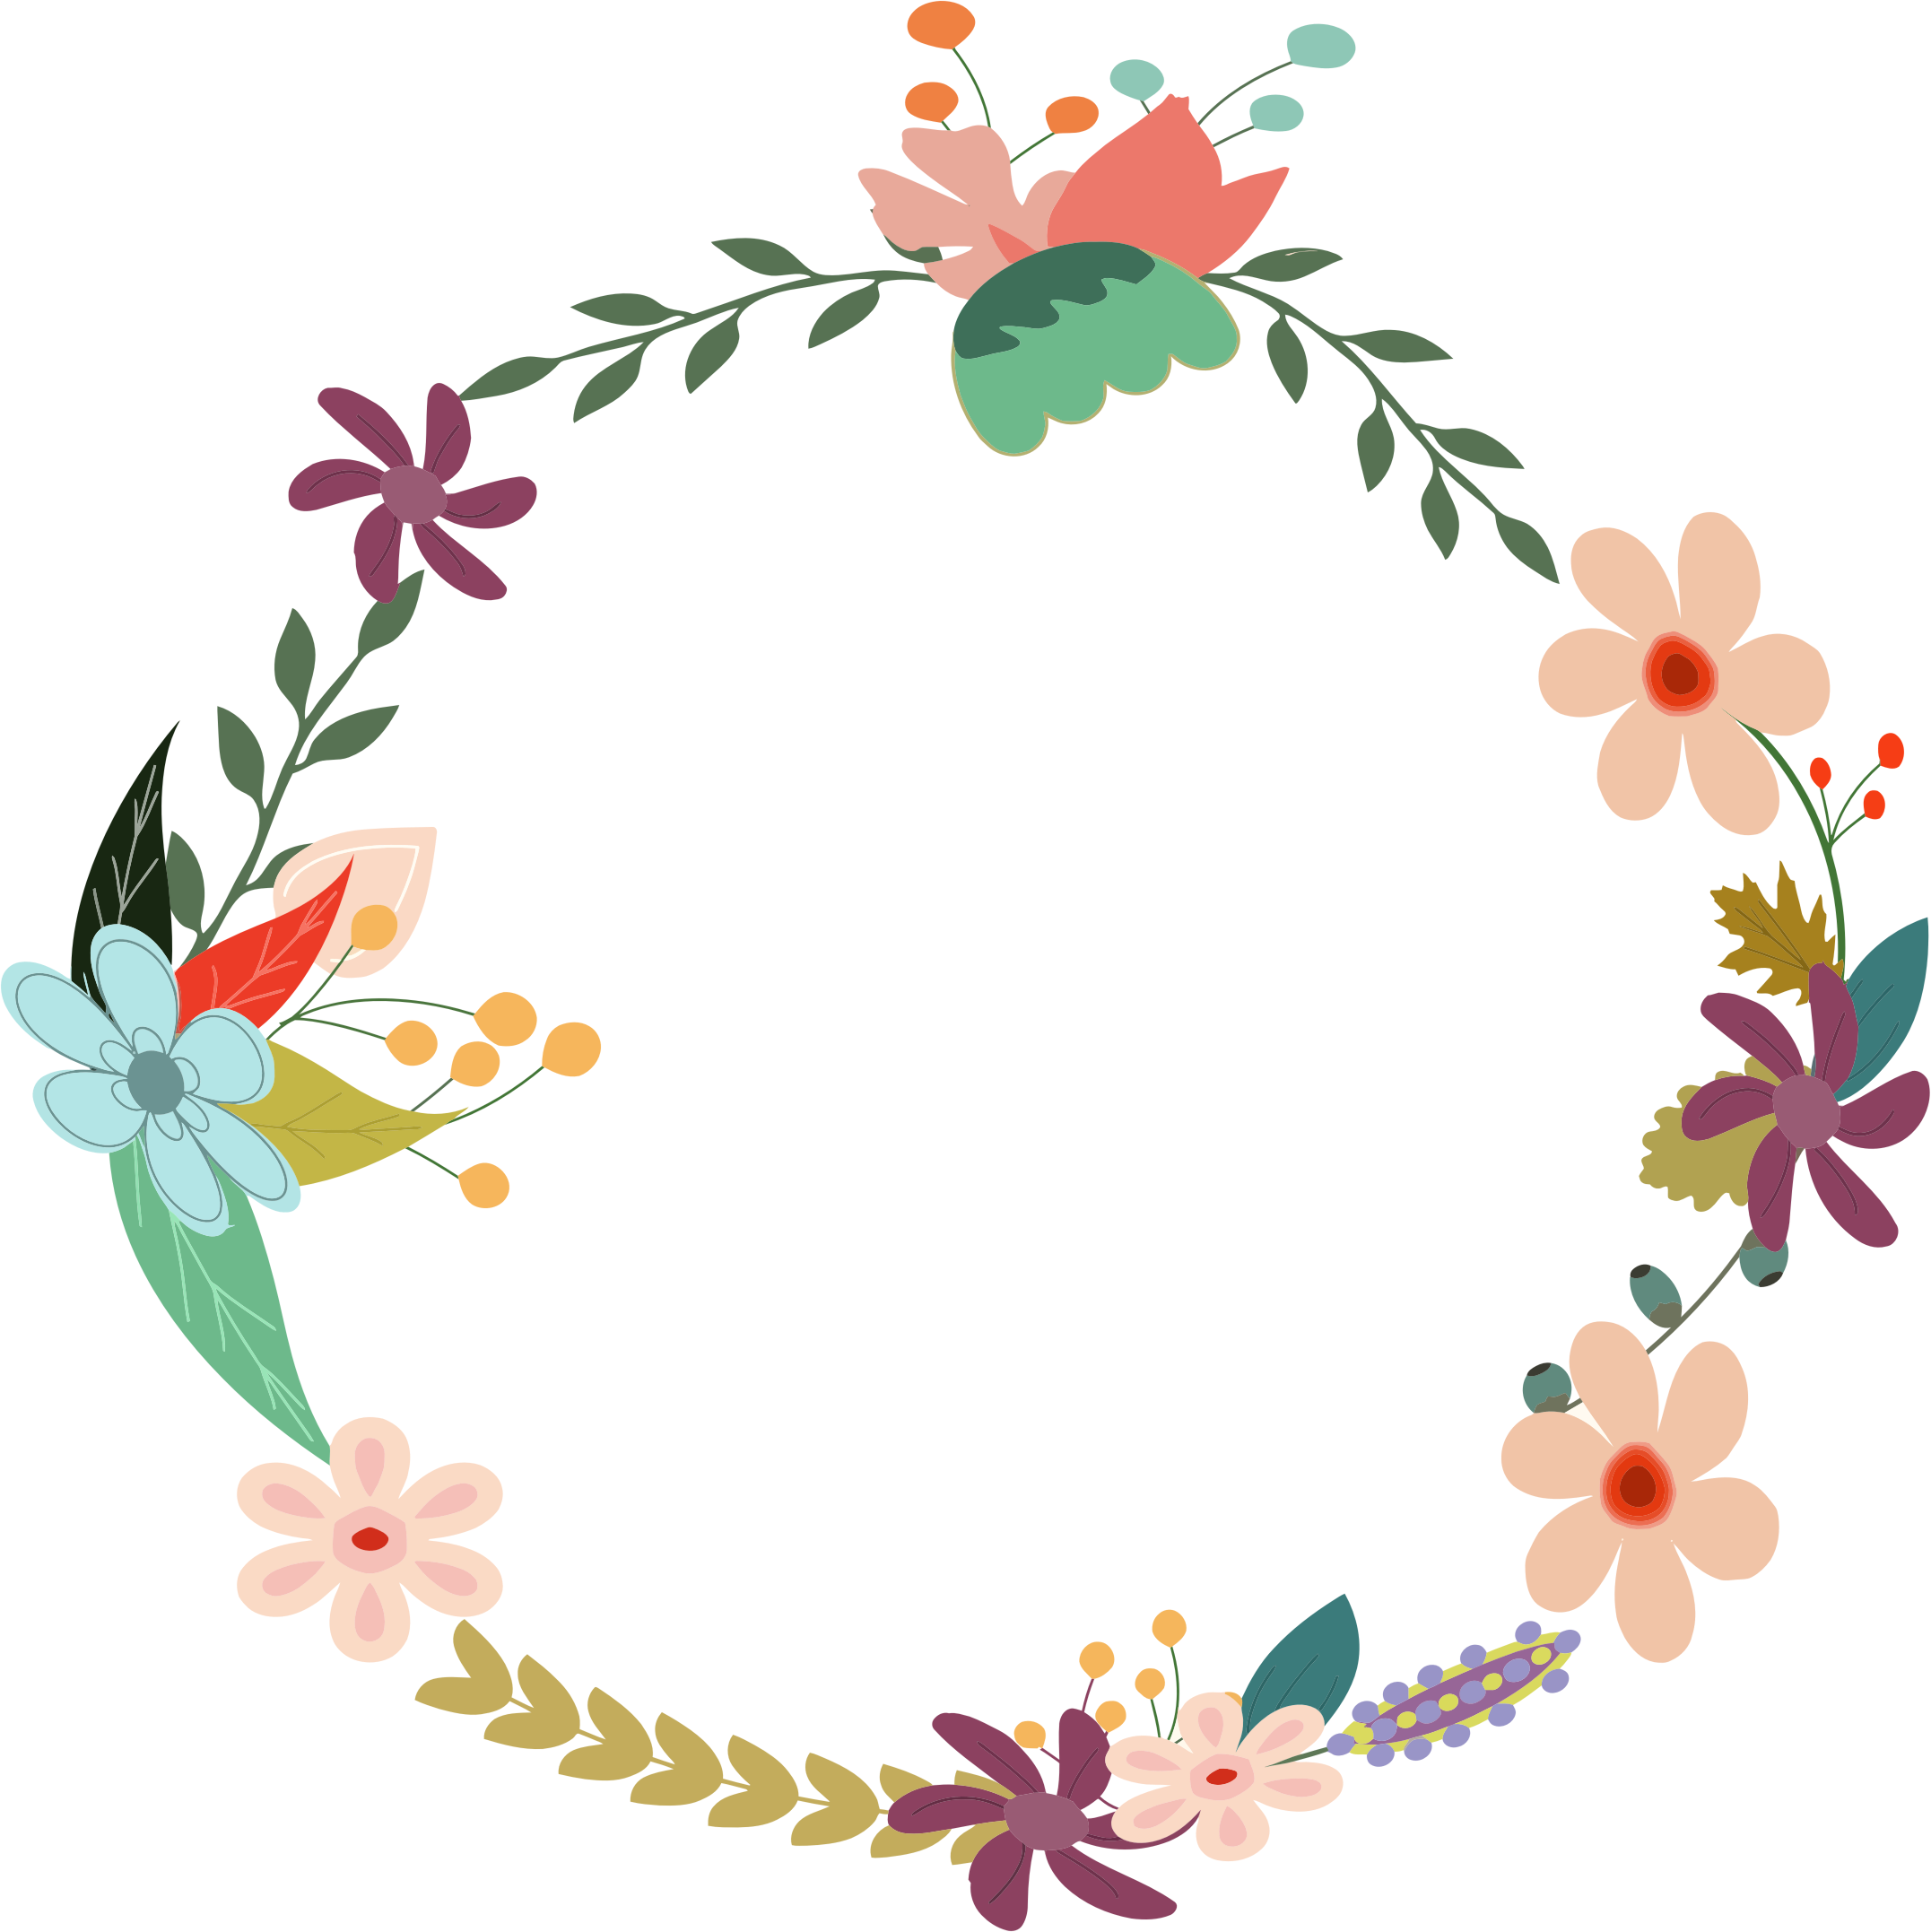 Floral wreath clipart - Clipground